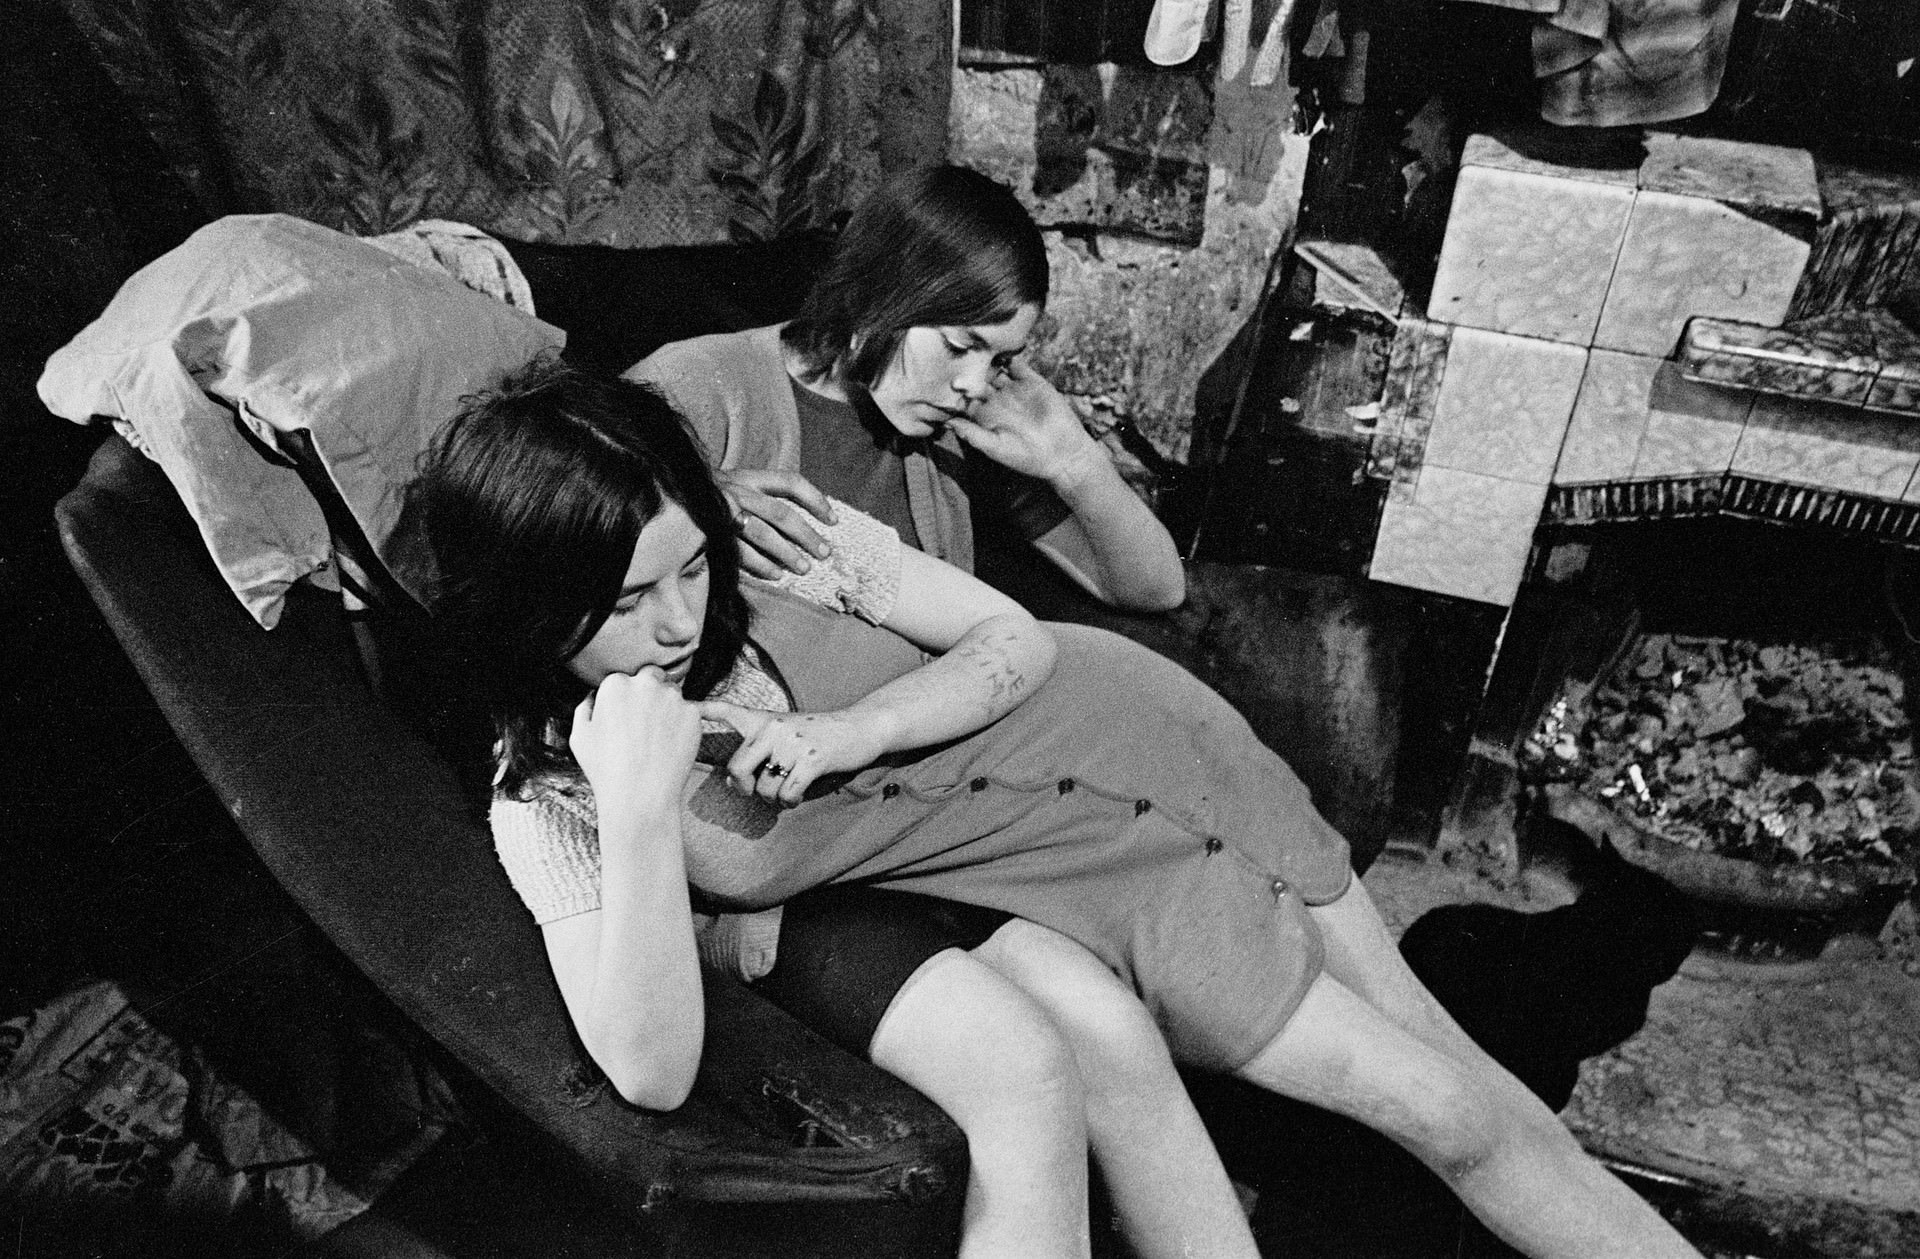 Glasgow, 1970 Sisters sharing a chair in a Gorbals slum tenement